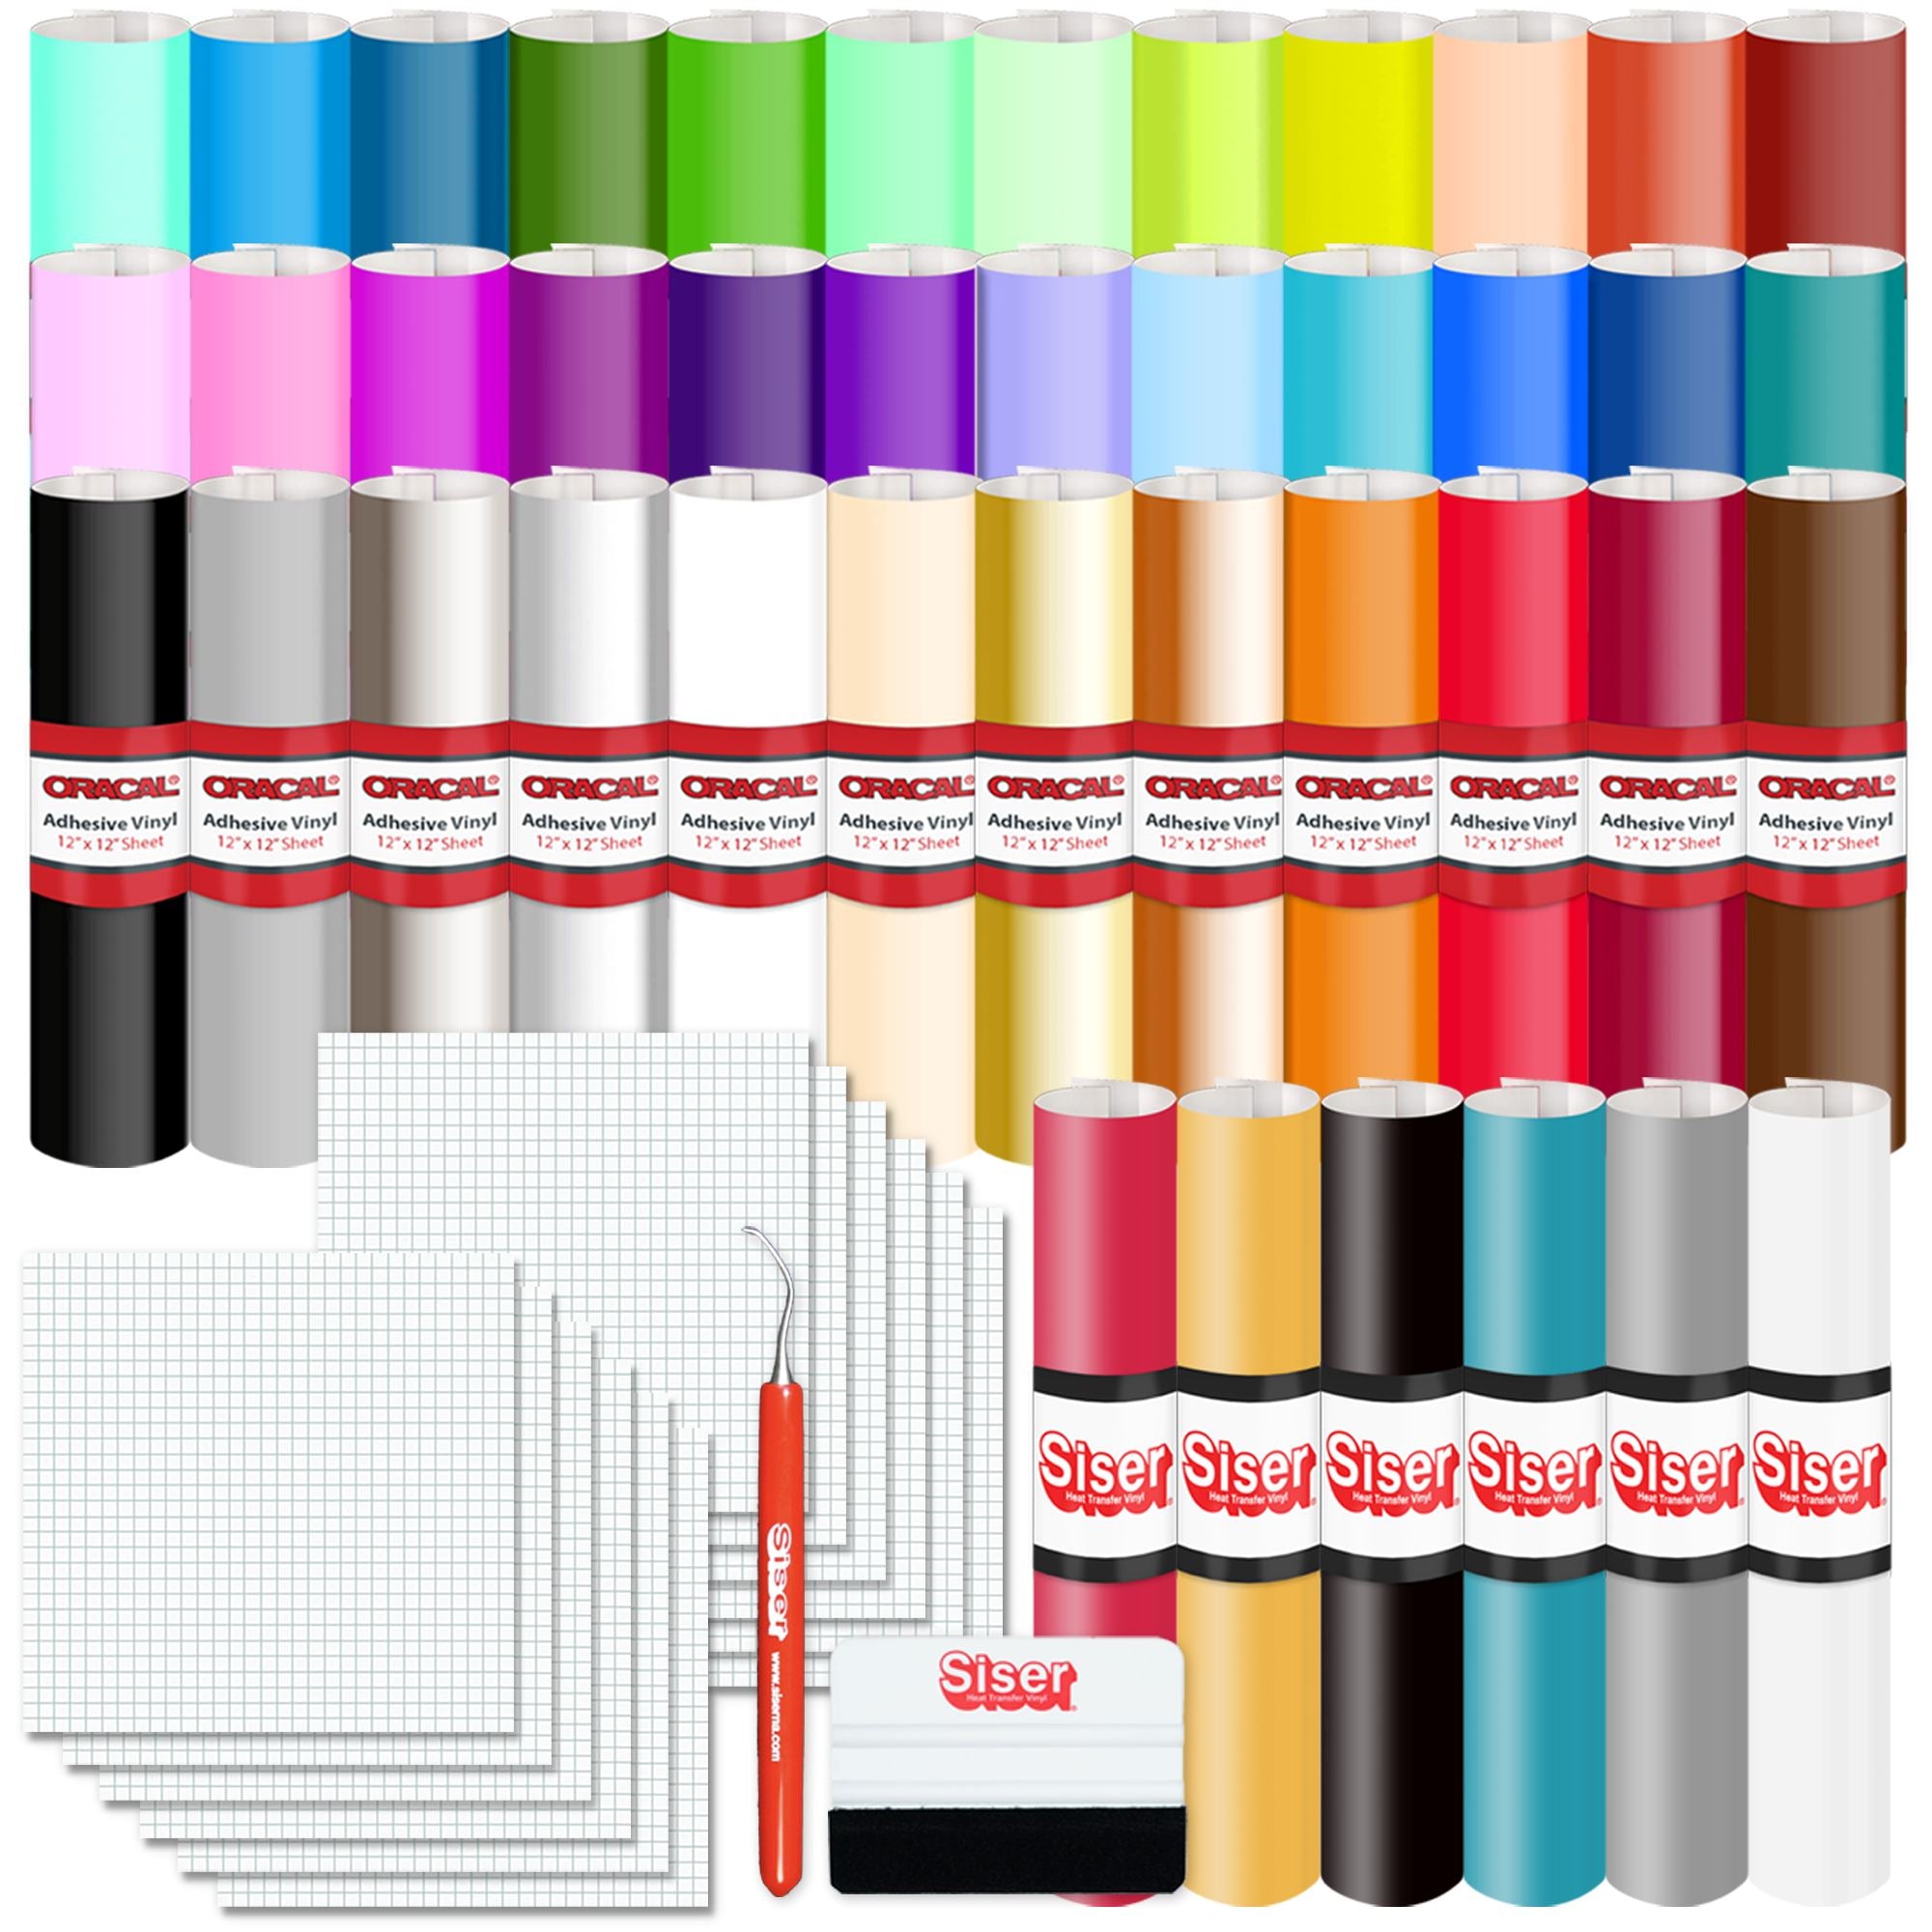 ORACAL 651 Color Chart Oracle 651 Permanent Vinyl Color Guide, 2 Ready to  Use Jpg's Fully Editable Canva Template, All Colors 